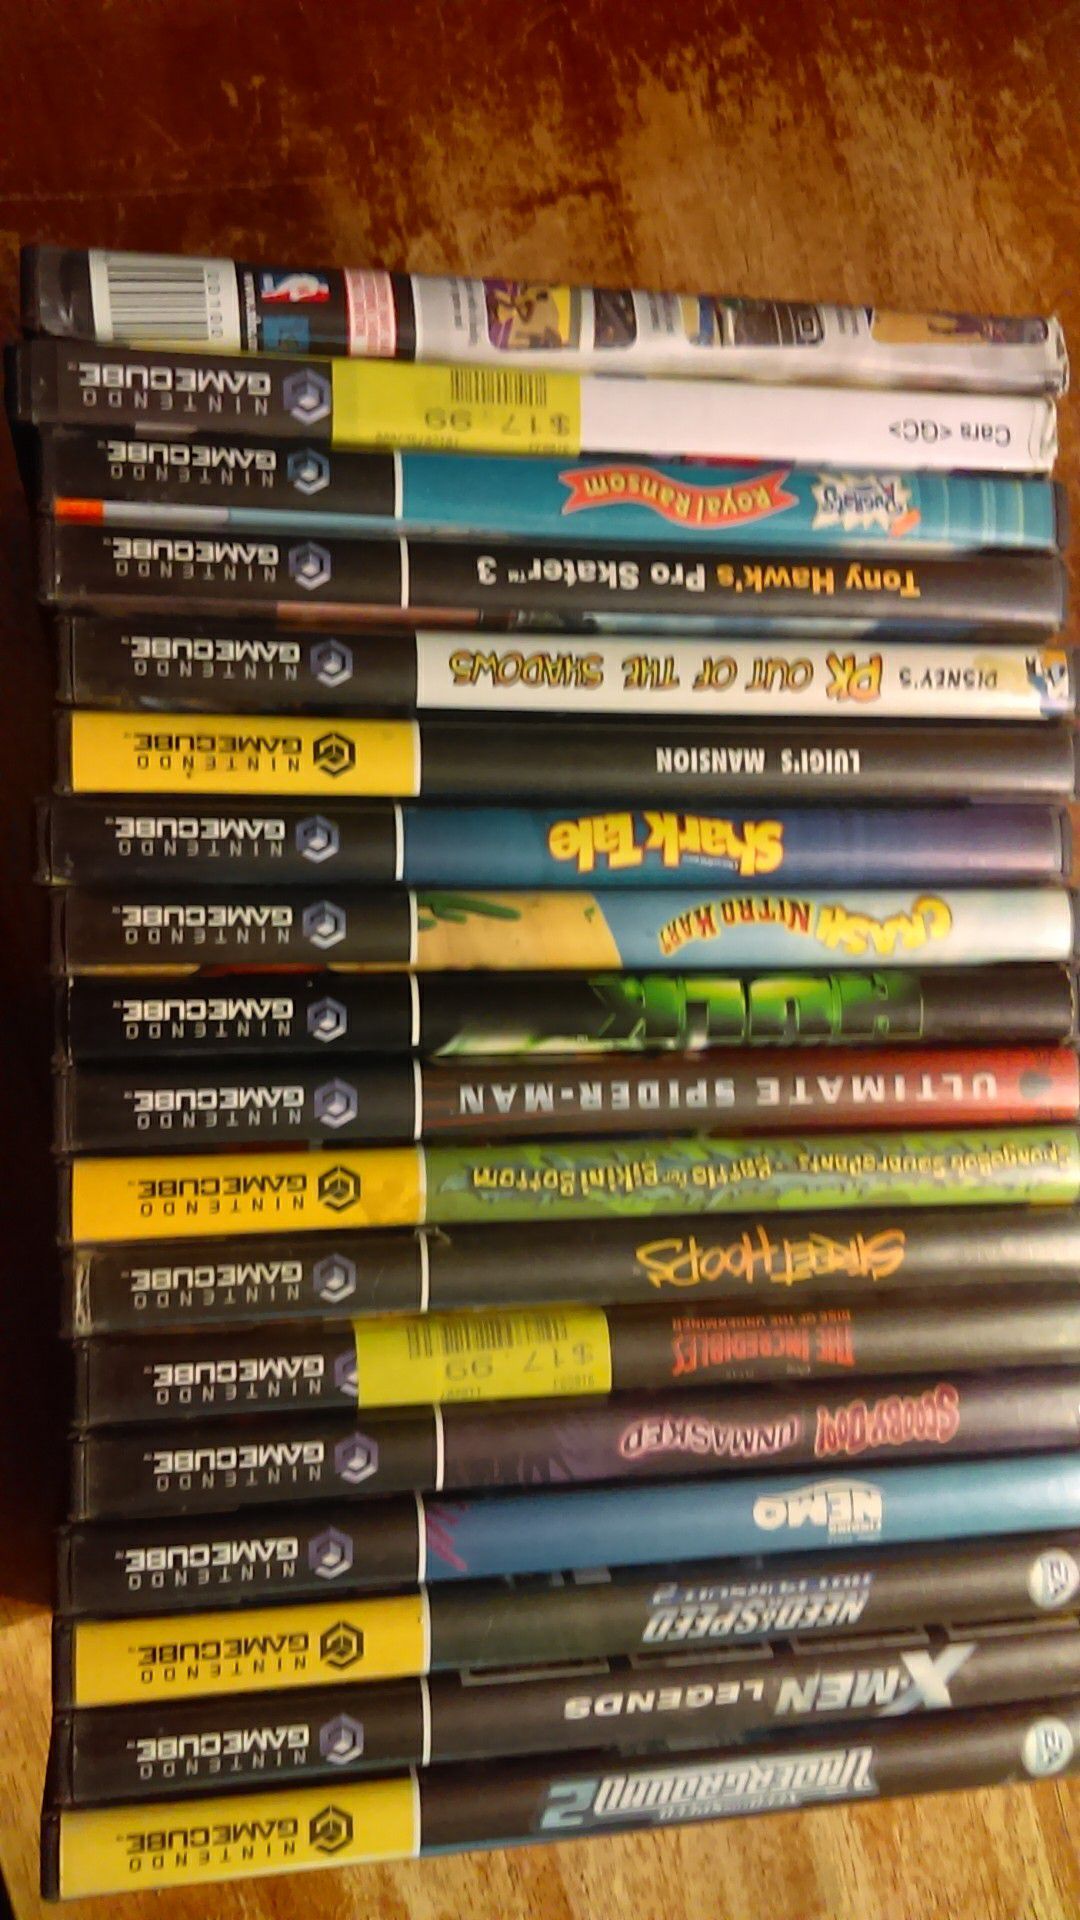 18 Gamecube games for sale.